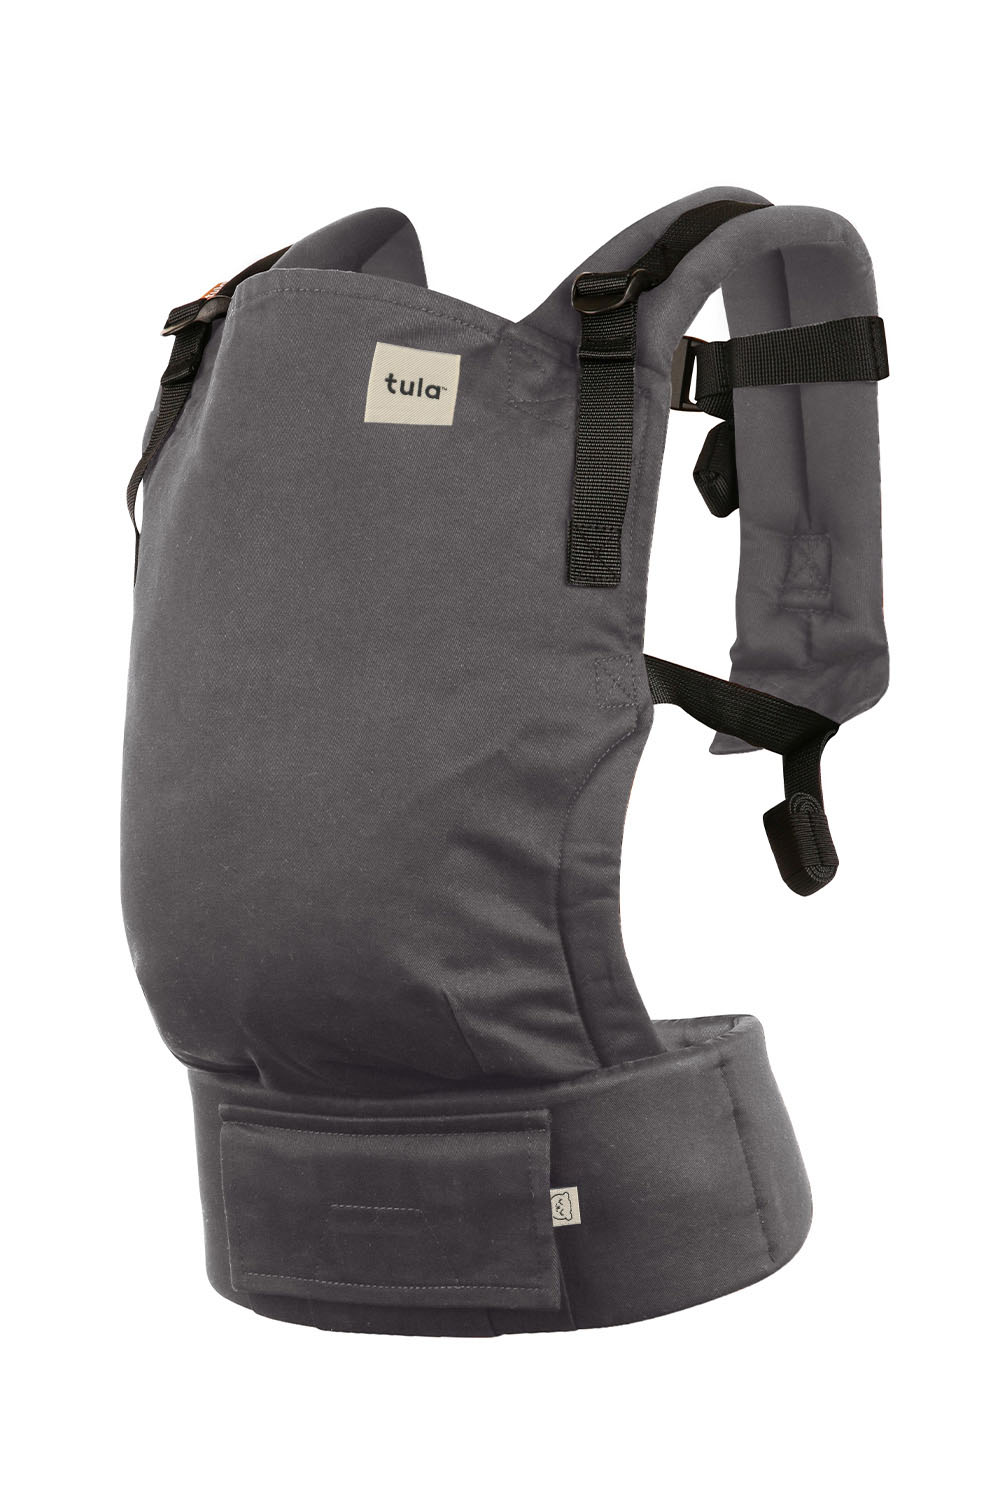 Ergobaby Adapt Carrier  Instructions Front Inward with H straps 